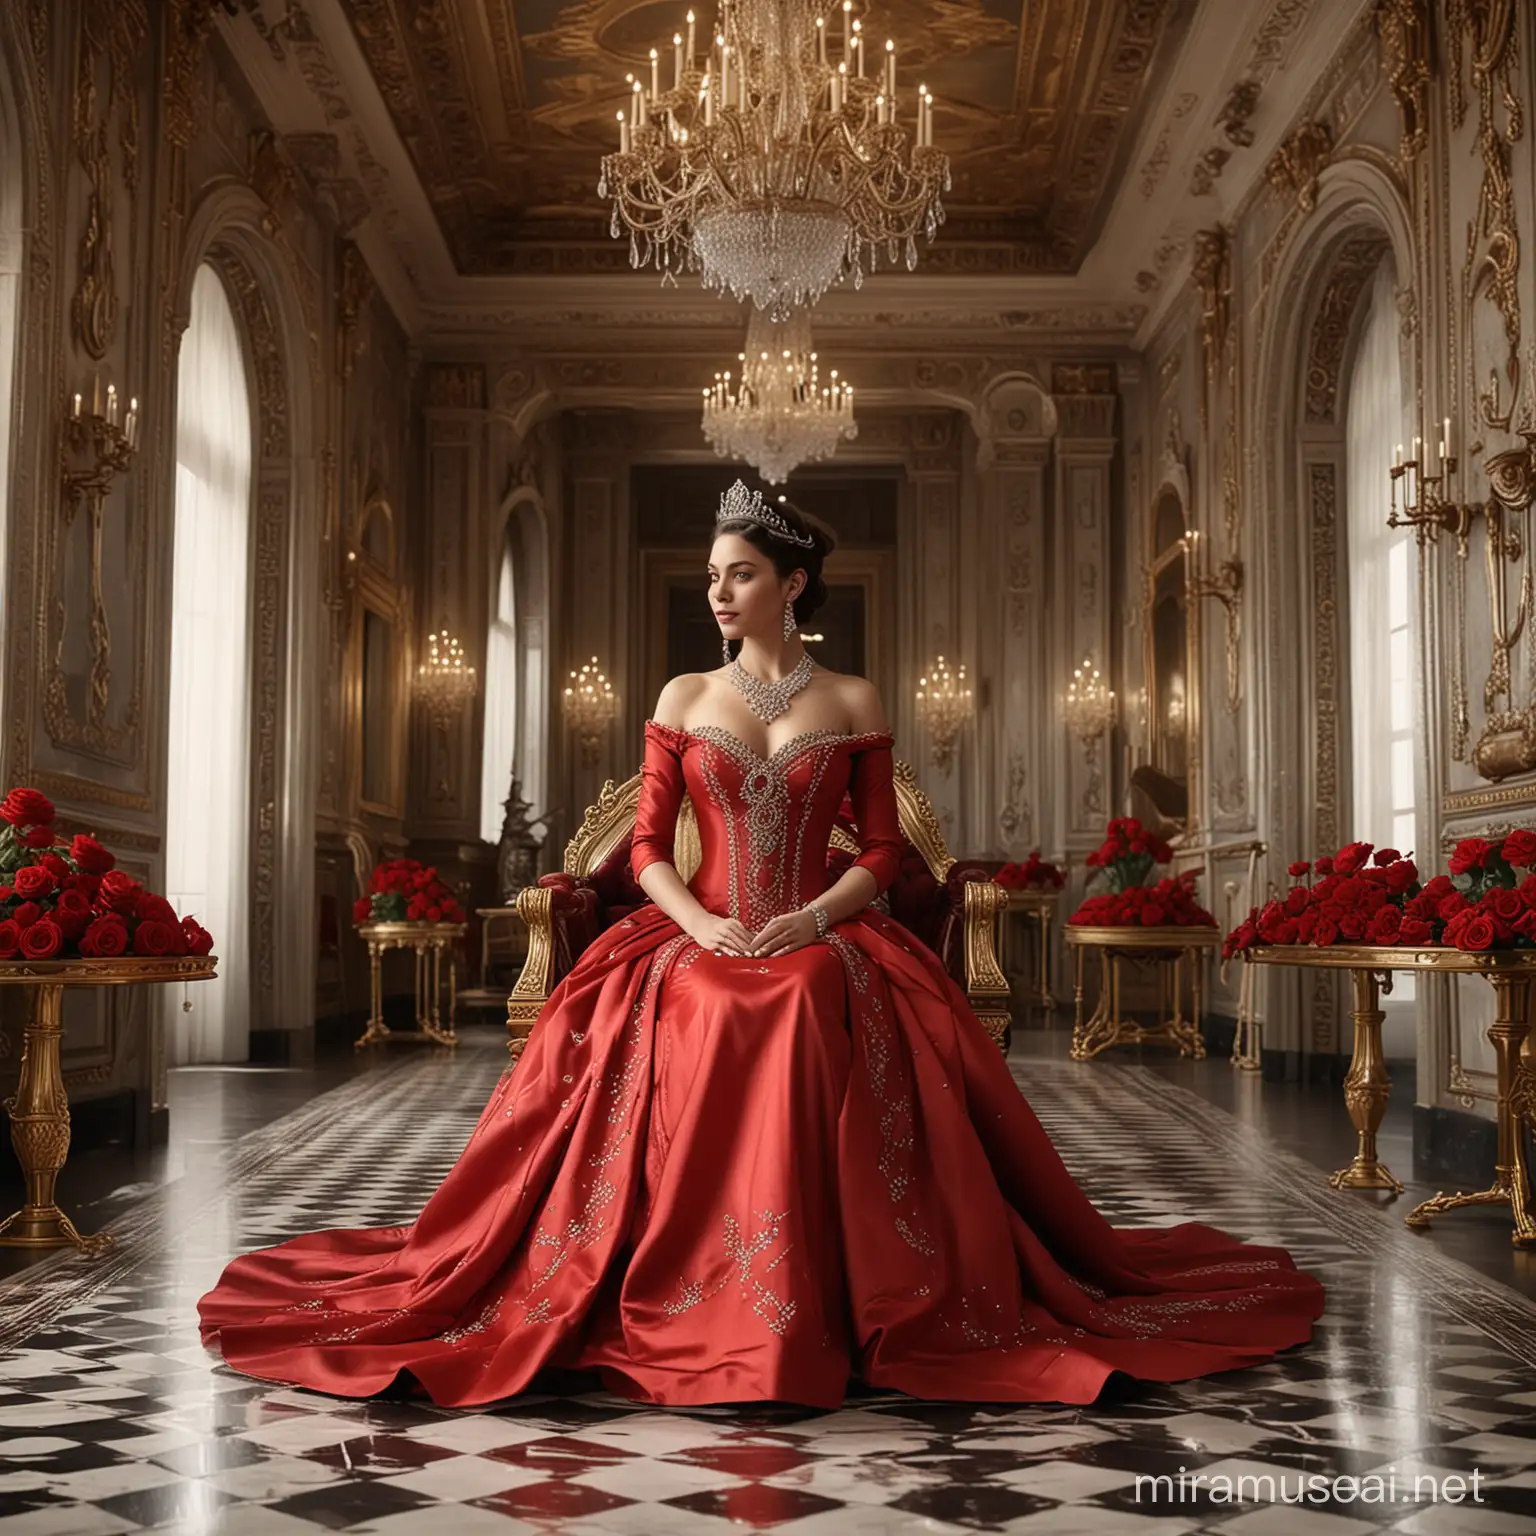 For an image like this, you could use a prompt such as: "A hyper-realistic digital artwork of an elegant queen seated on a throne, with an Afrofuturistic theme. The setting is a grand hall with checkerboard flooring and ornate, baroque-style silver wallpaper. The queen is adorned in a luxurious red gown with a sweeping train and sparkling with jewels. Her hair is styled in an elaborate updo with braids and adorned with musical notes and red roses, symbolizing her connection to art and beauty. In the background, a stylized city skyline suggests a blend of modern urban life and timeless royalty. Surrounding the queen are chains made of music, further emphasizing her influence over the realm of sound and song. The image is detailed with a focus on reflective surfaces and intricate patterns, adding to the opulent atmosphere, 32k render, hyperrealistic, detailed. 